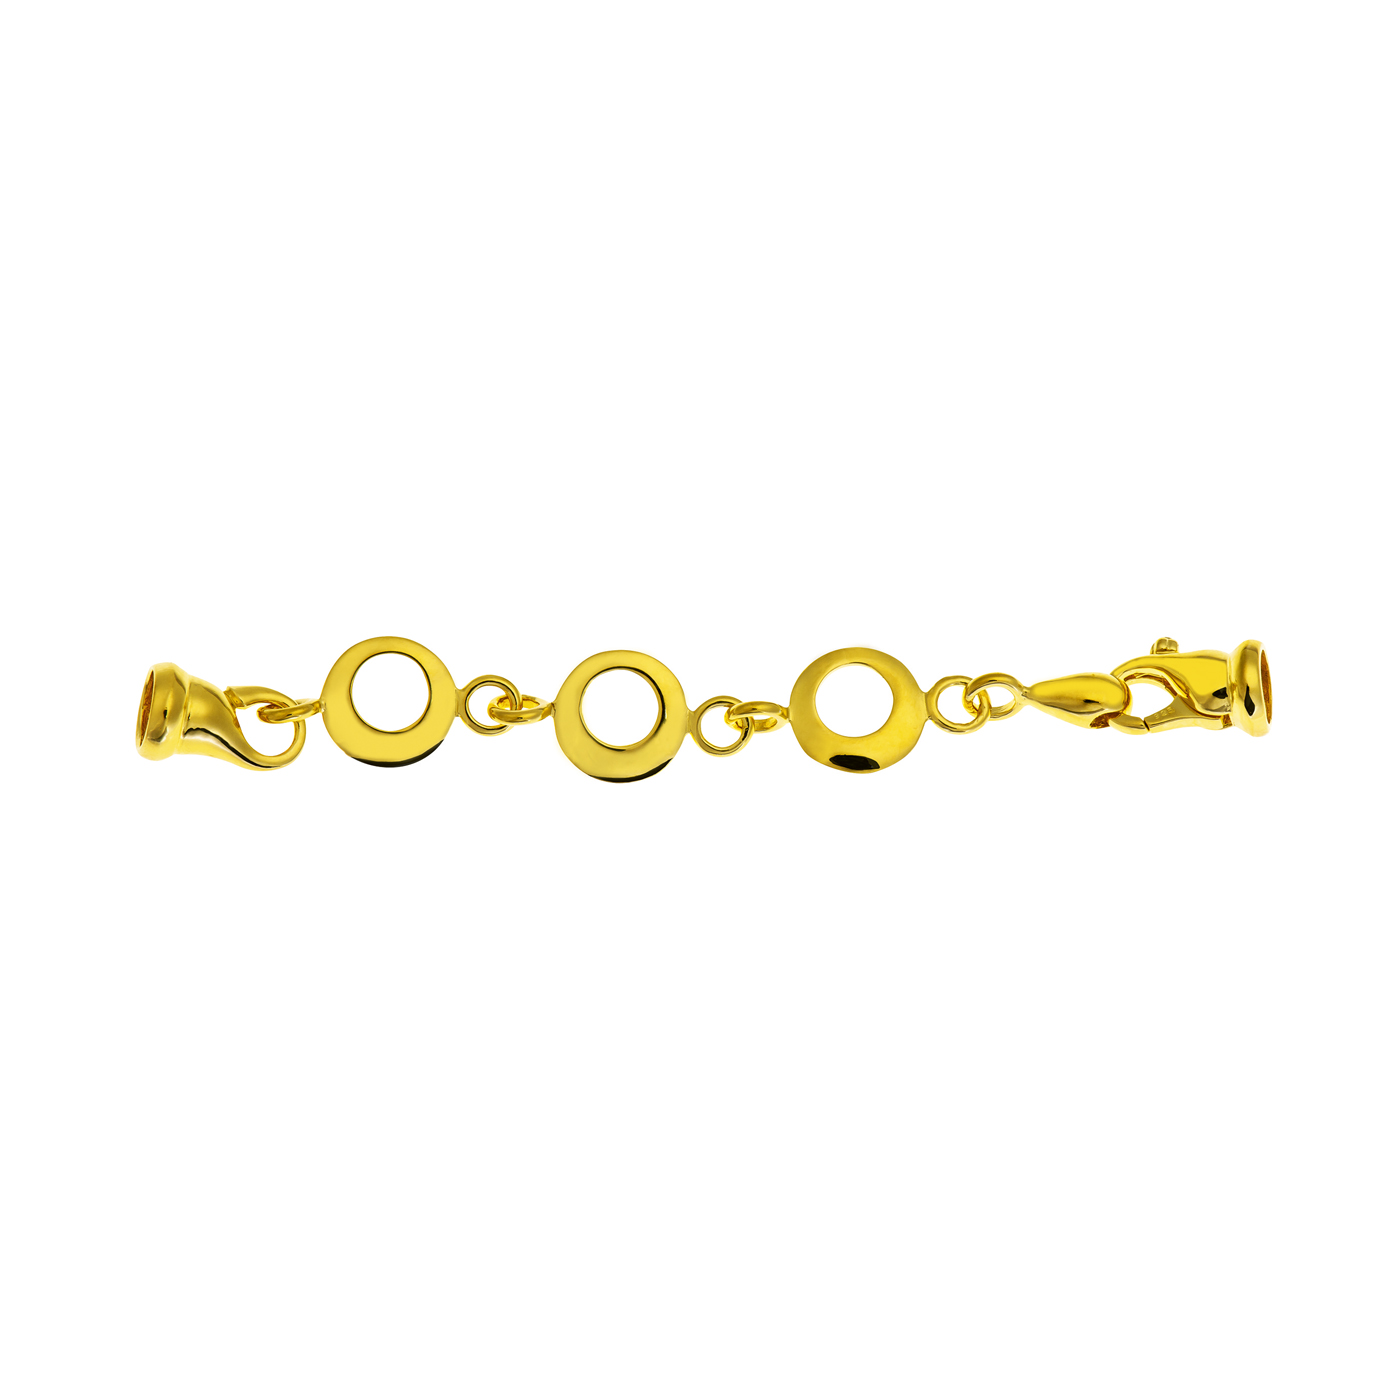 Elongation Chain, 925Ag Gold-Plated, 77 mm - 1 piece